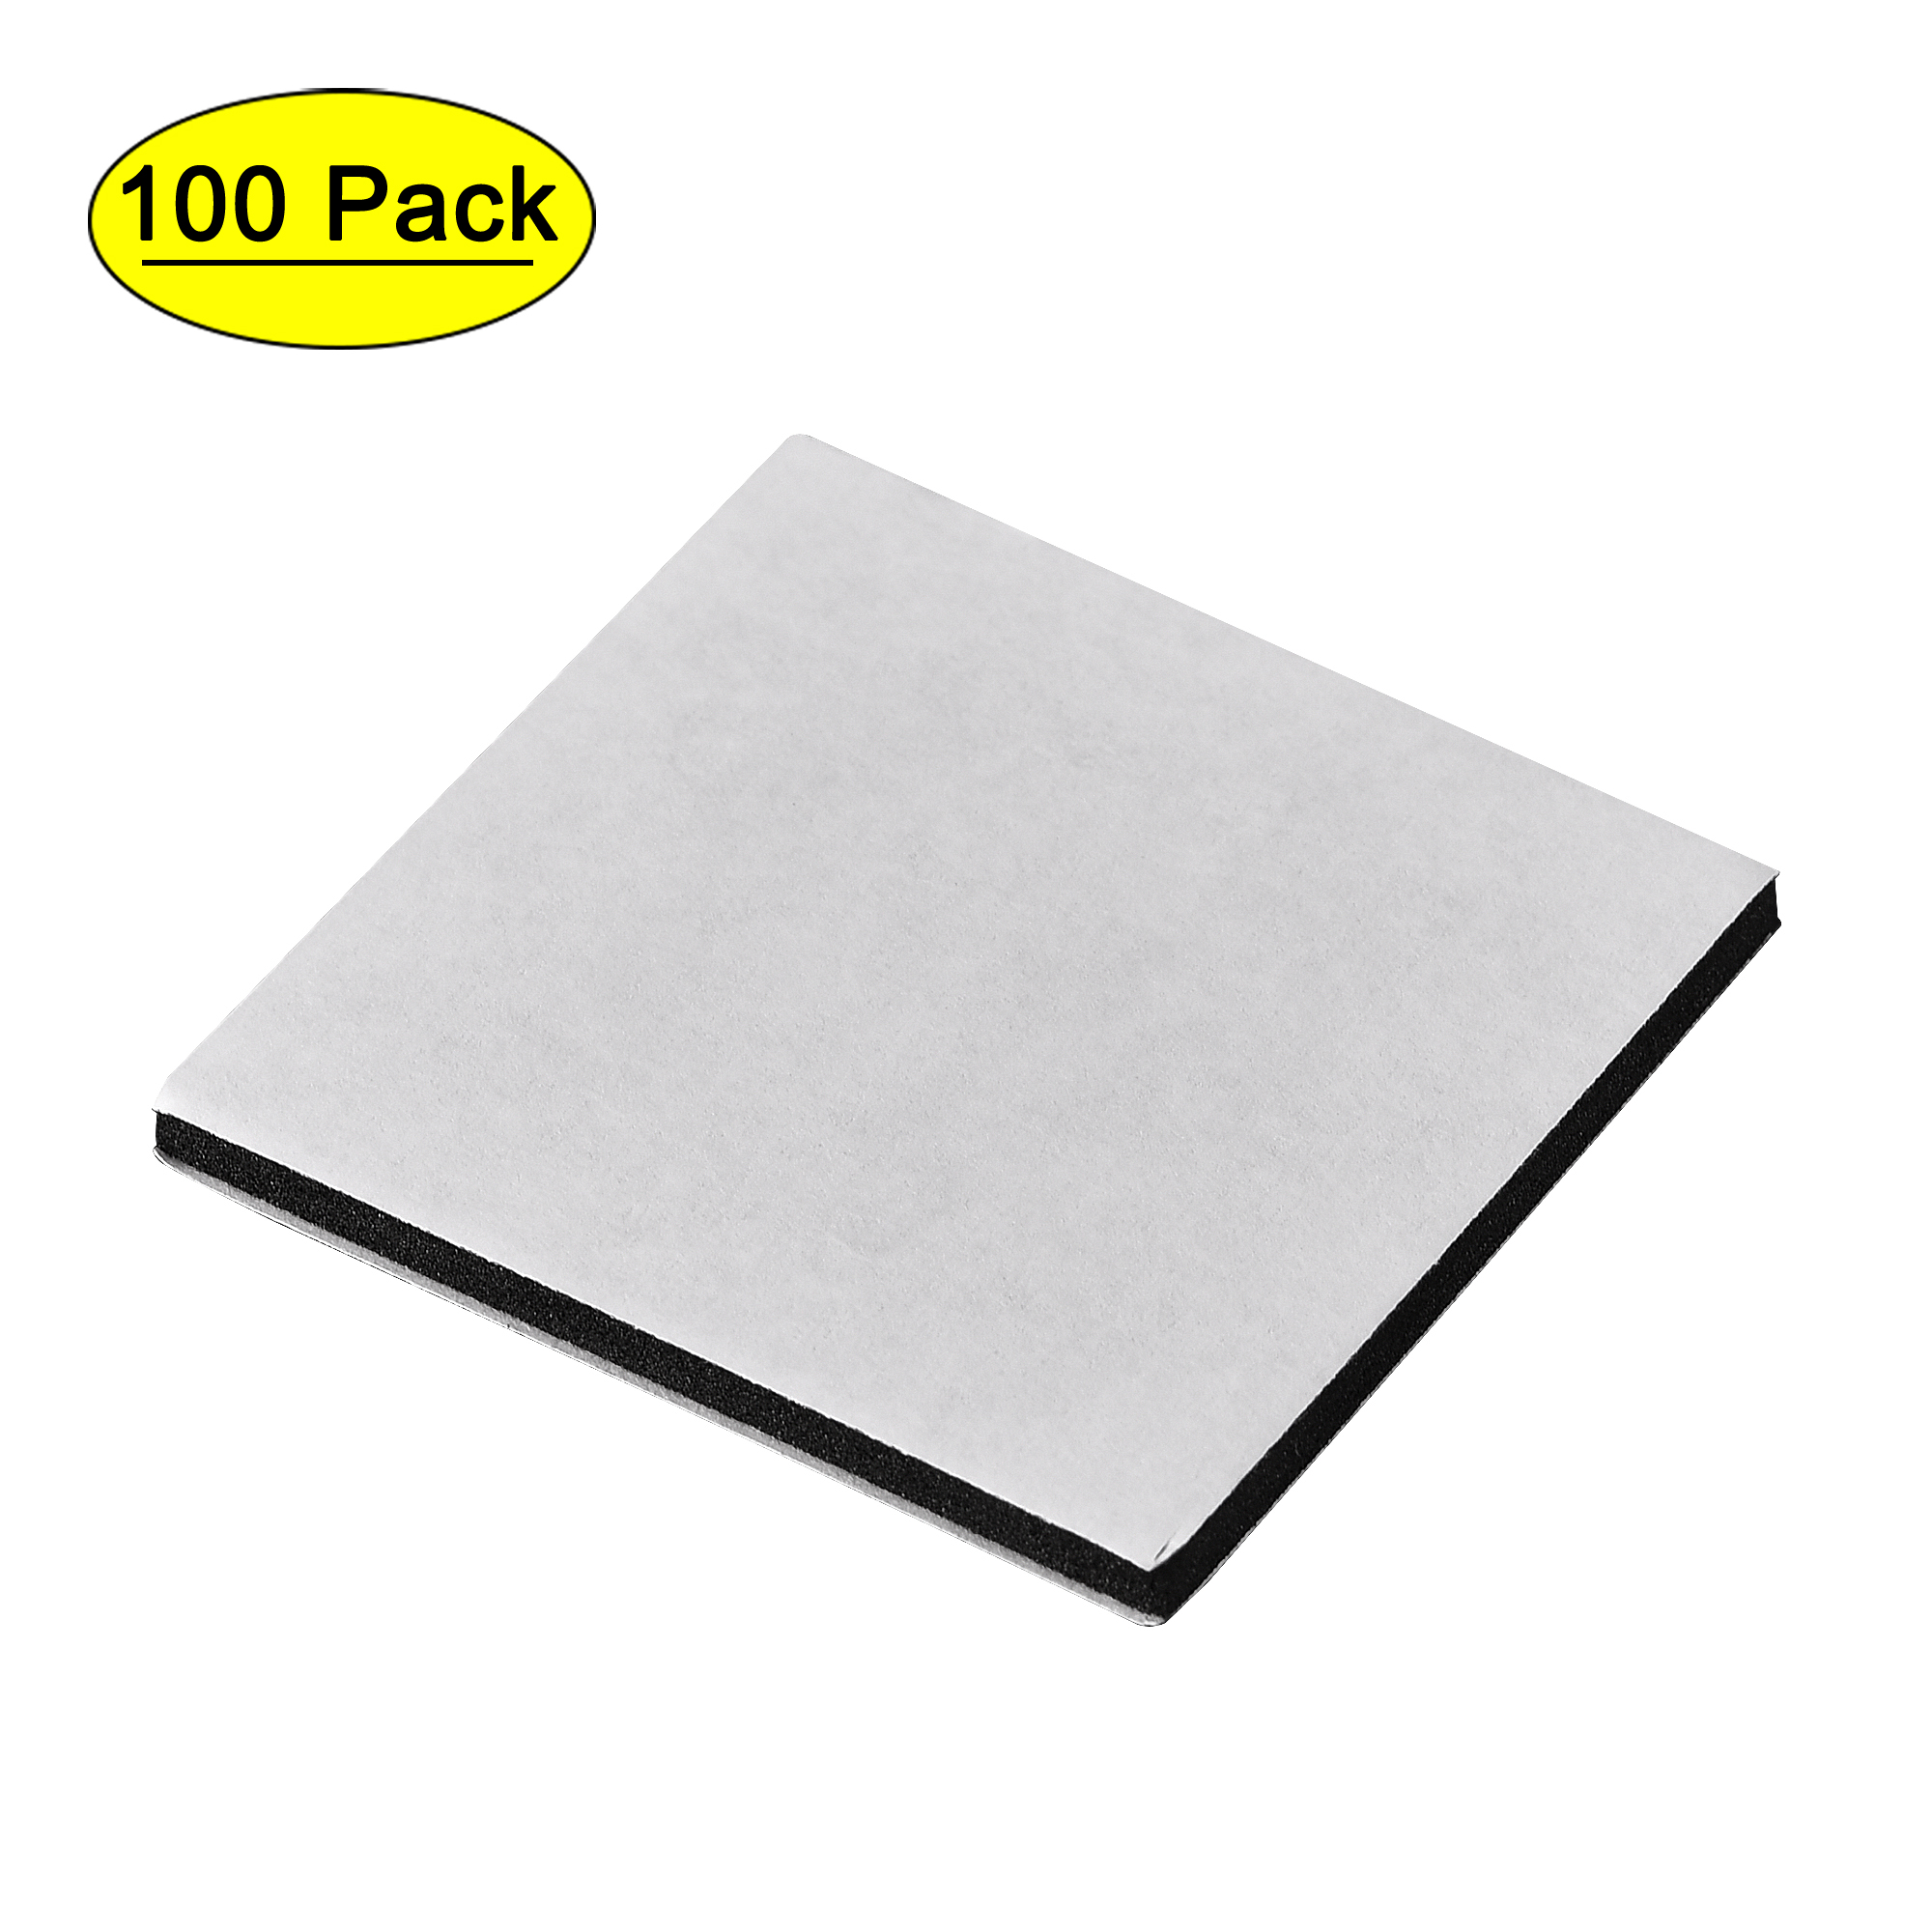 Uxcell 40 x 40 x 3mm Eva Foam Square Double Sided Sticky Pads Adhesive Tape Black 100 Pack